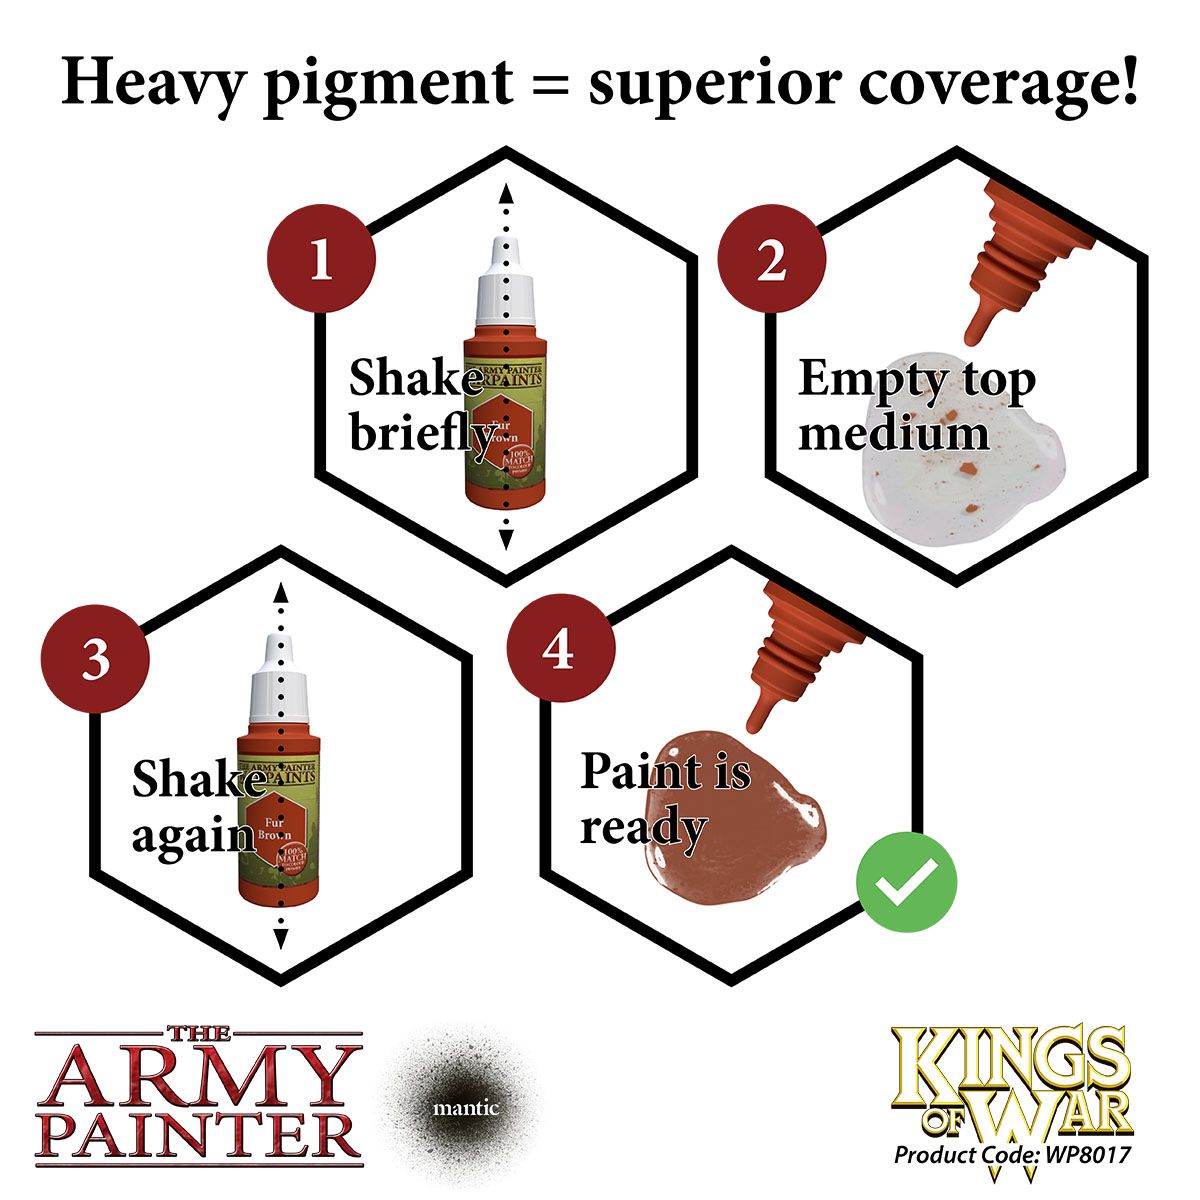 The Army Painter - Kings of War: Ogres Paint Set